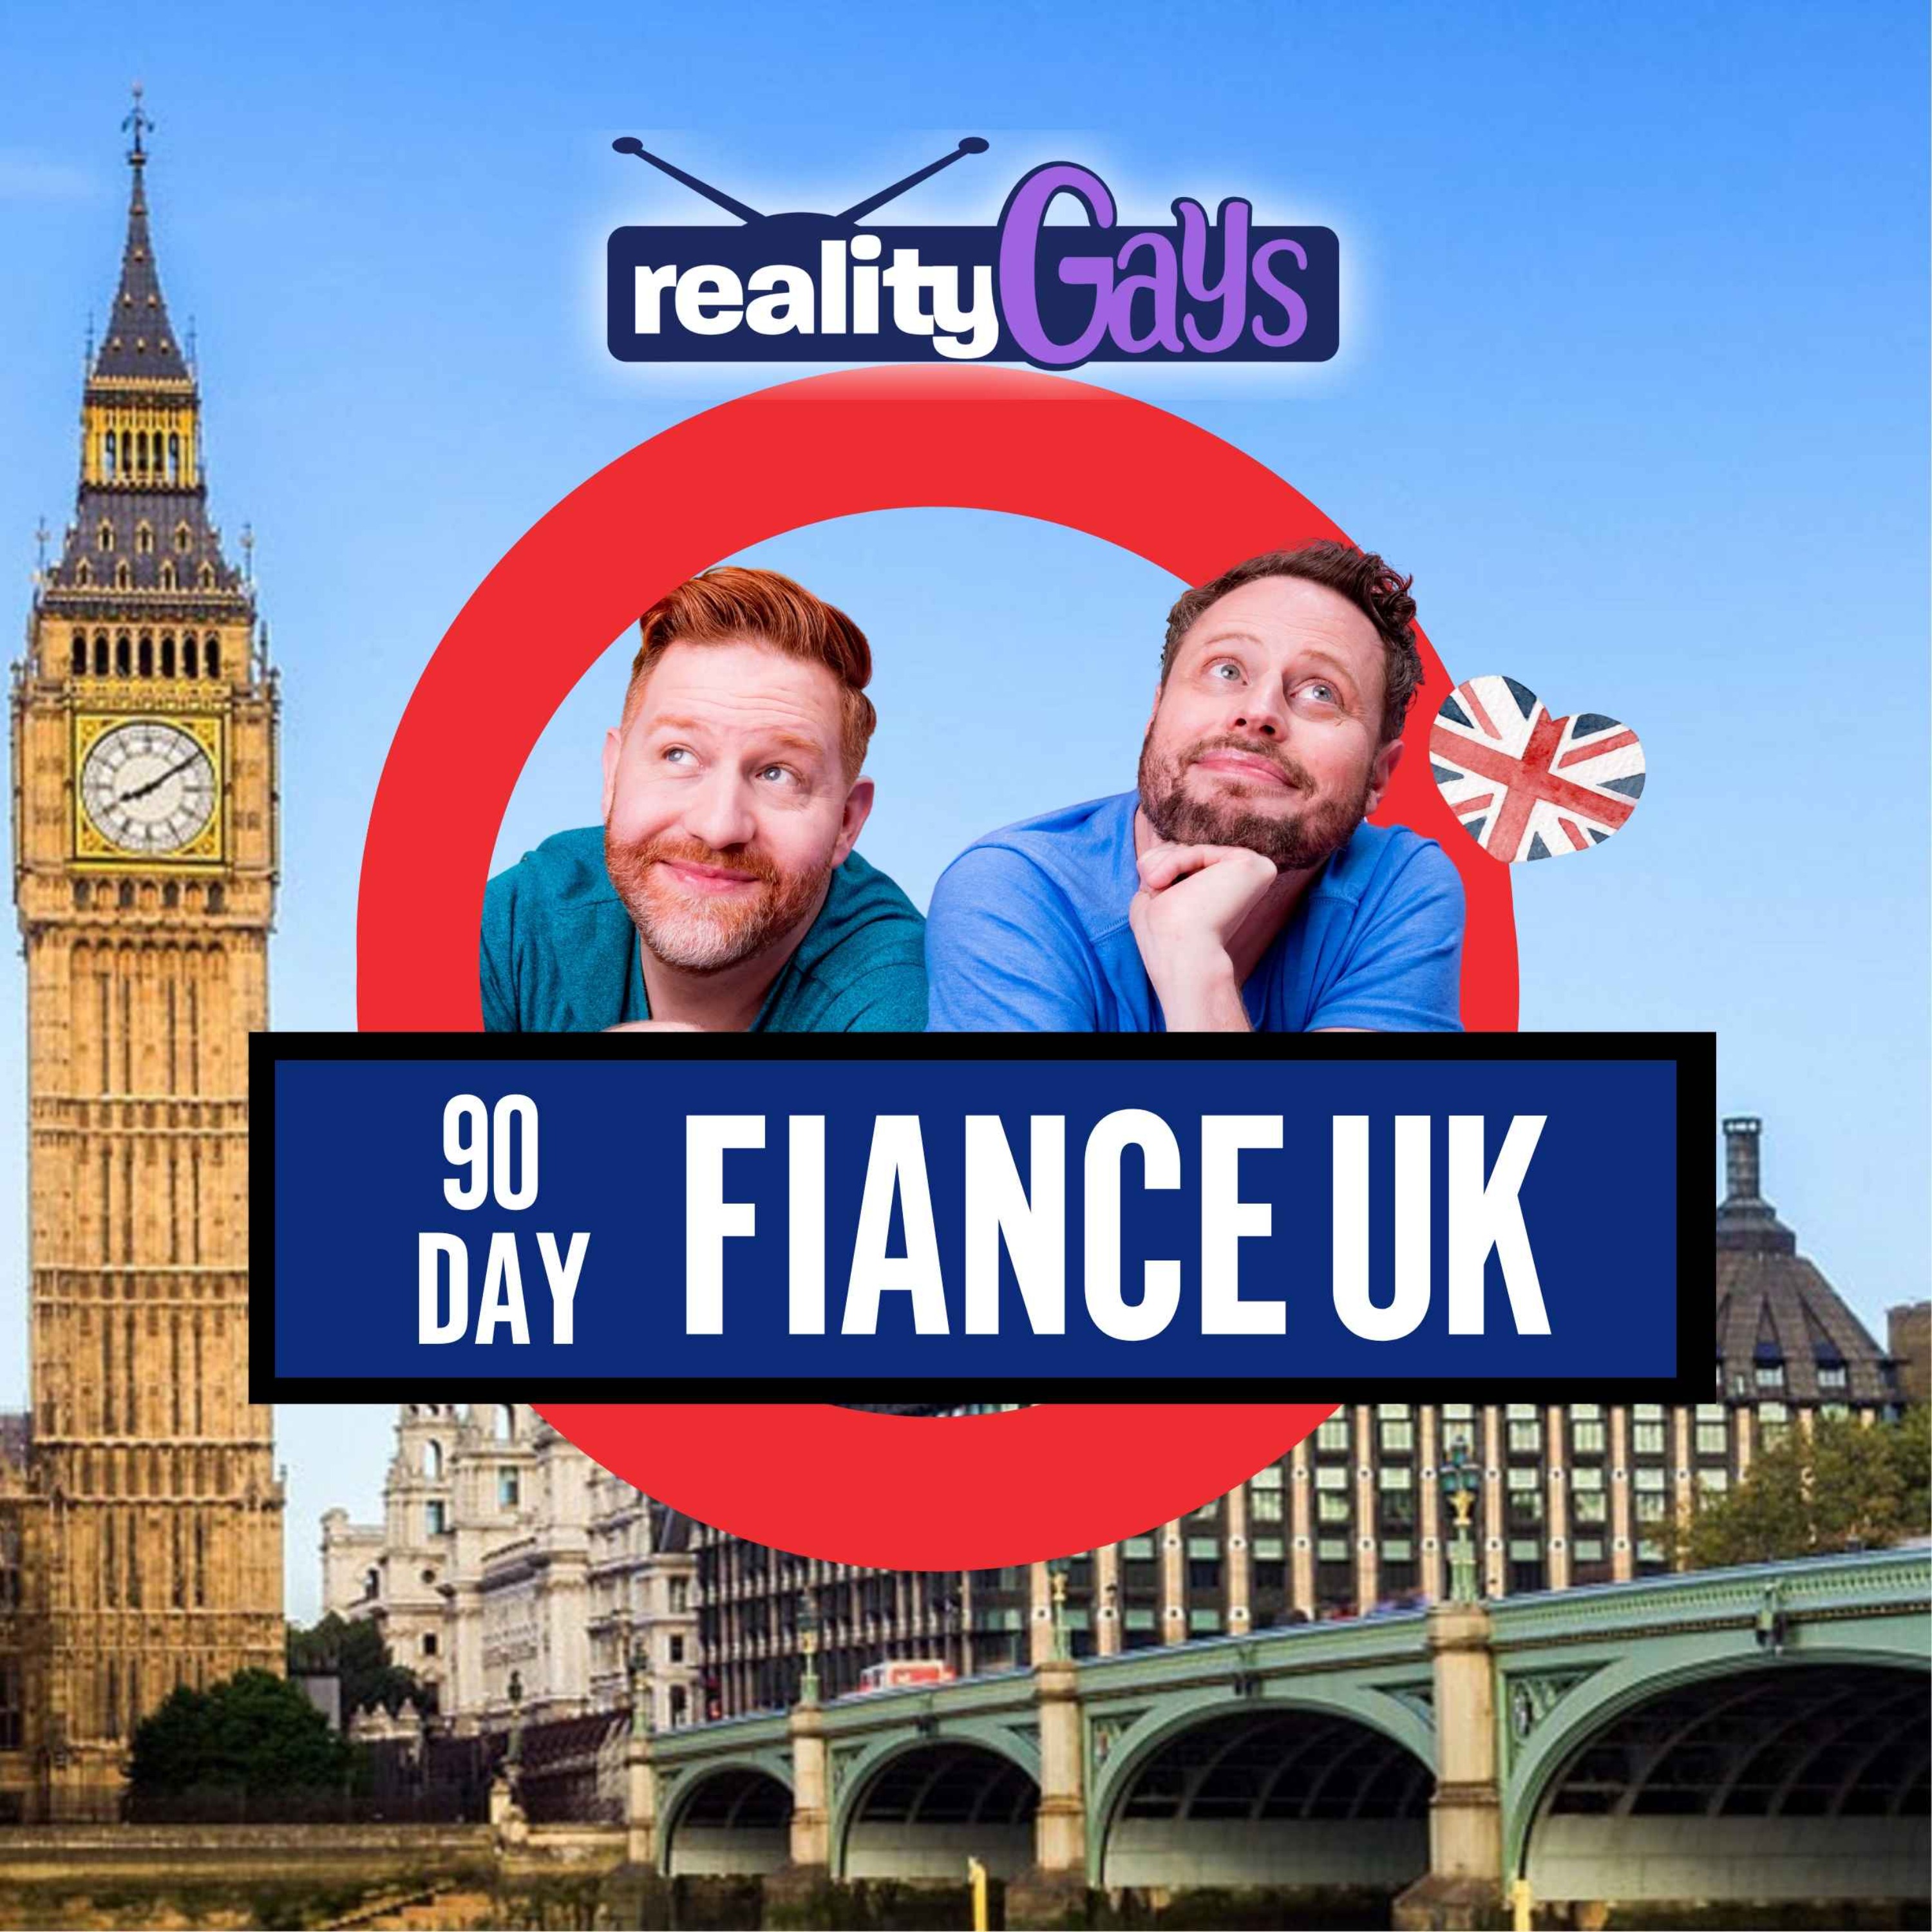 90 DAY FIANCÉ UK COLLAB with Blighty Day Fiancé: 0102 "You've Got to Come Clean" Image